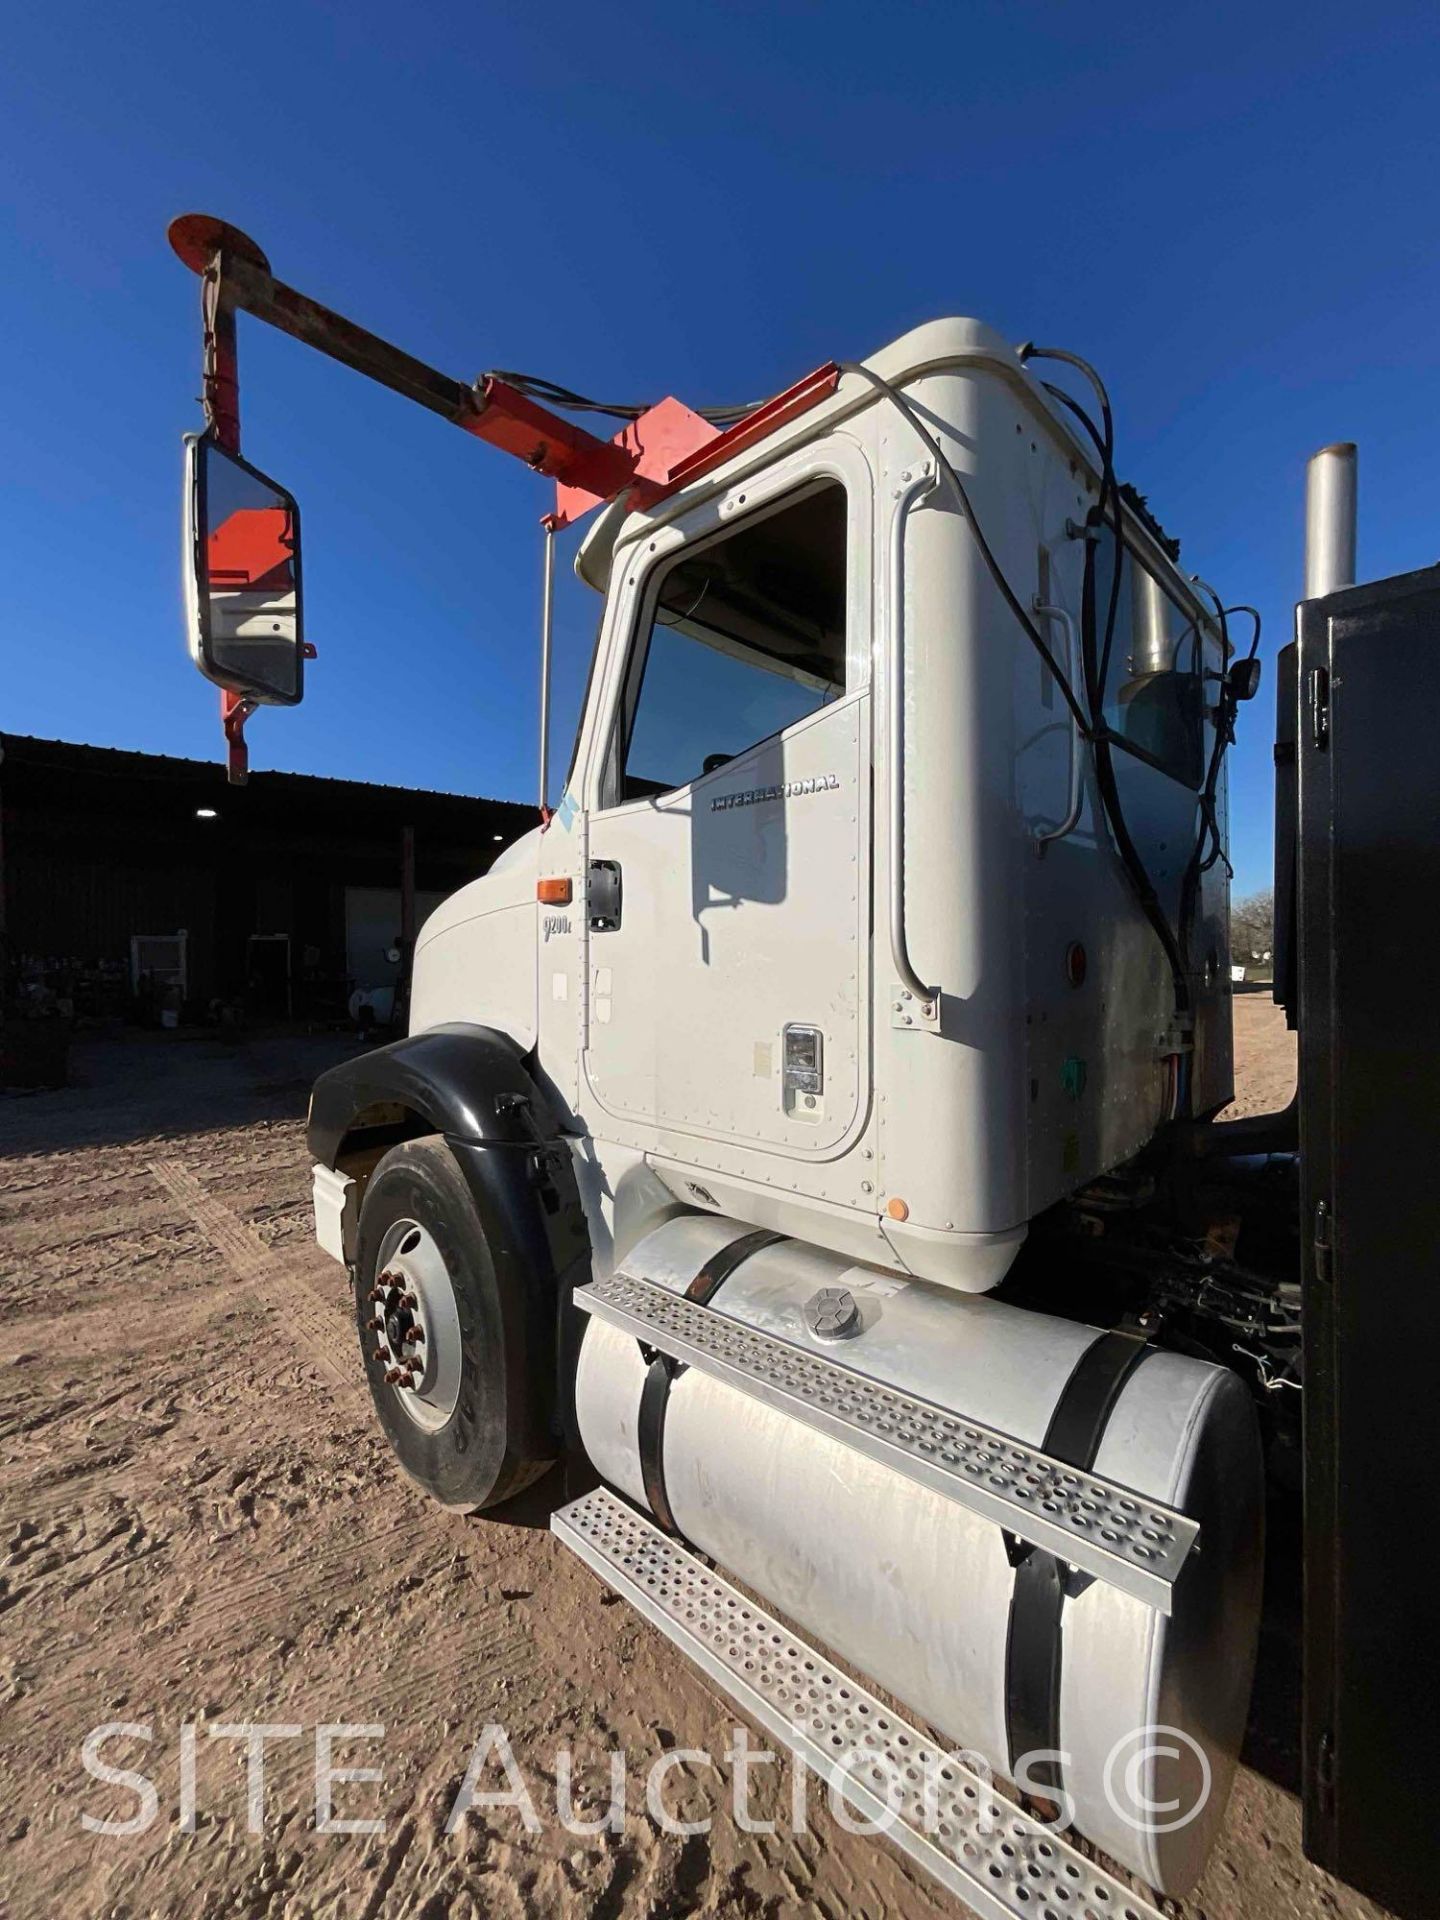 2007 International 9200i S/A Toter Truck - Image 19 of 27